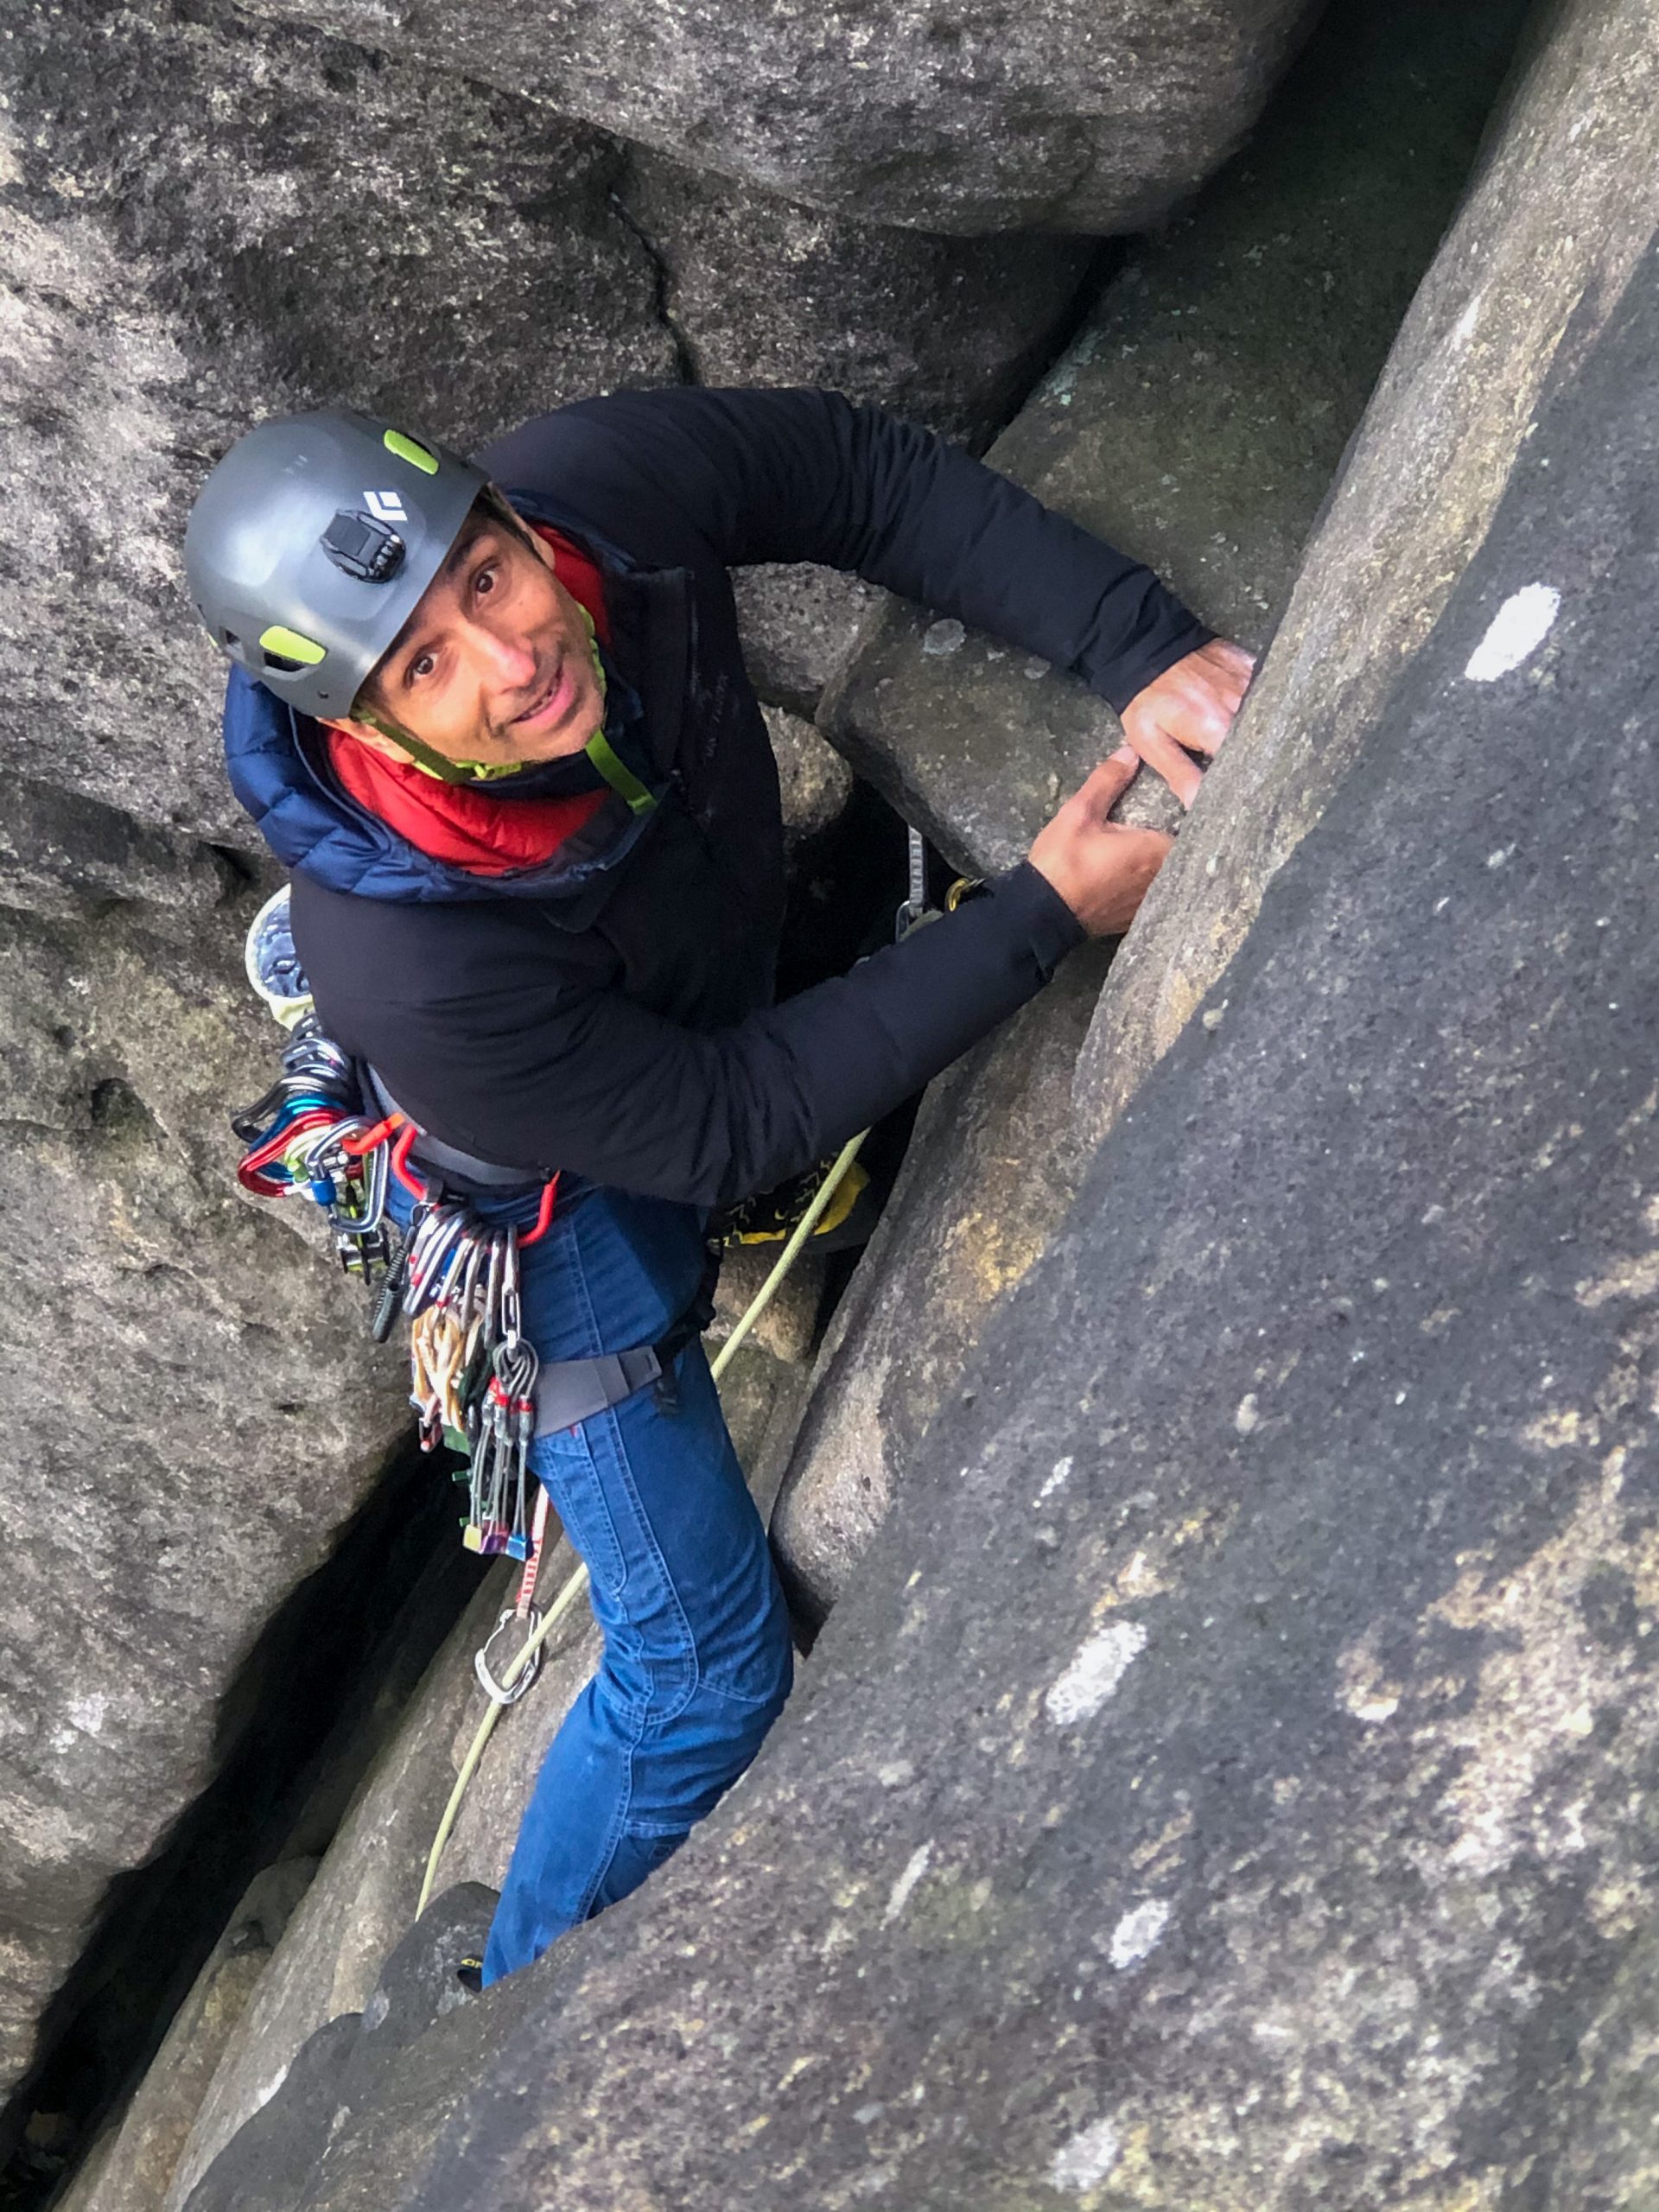 A climber smiles nervously as he learns to lead rock climb during a course in the Peak District